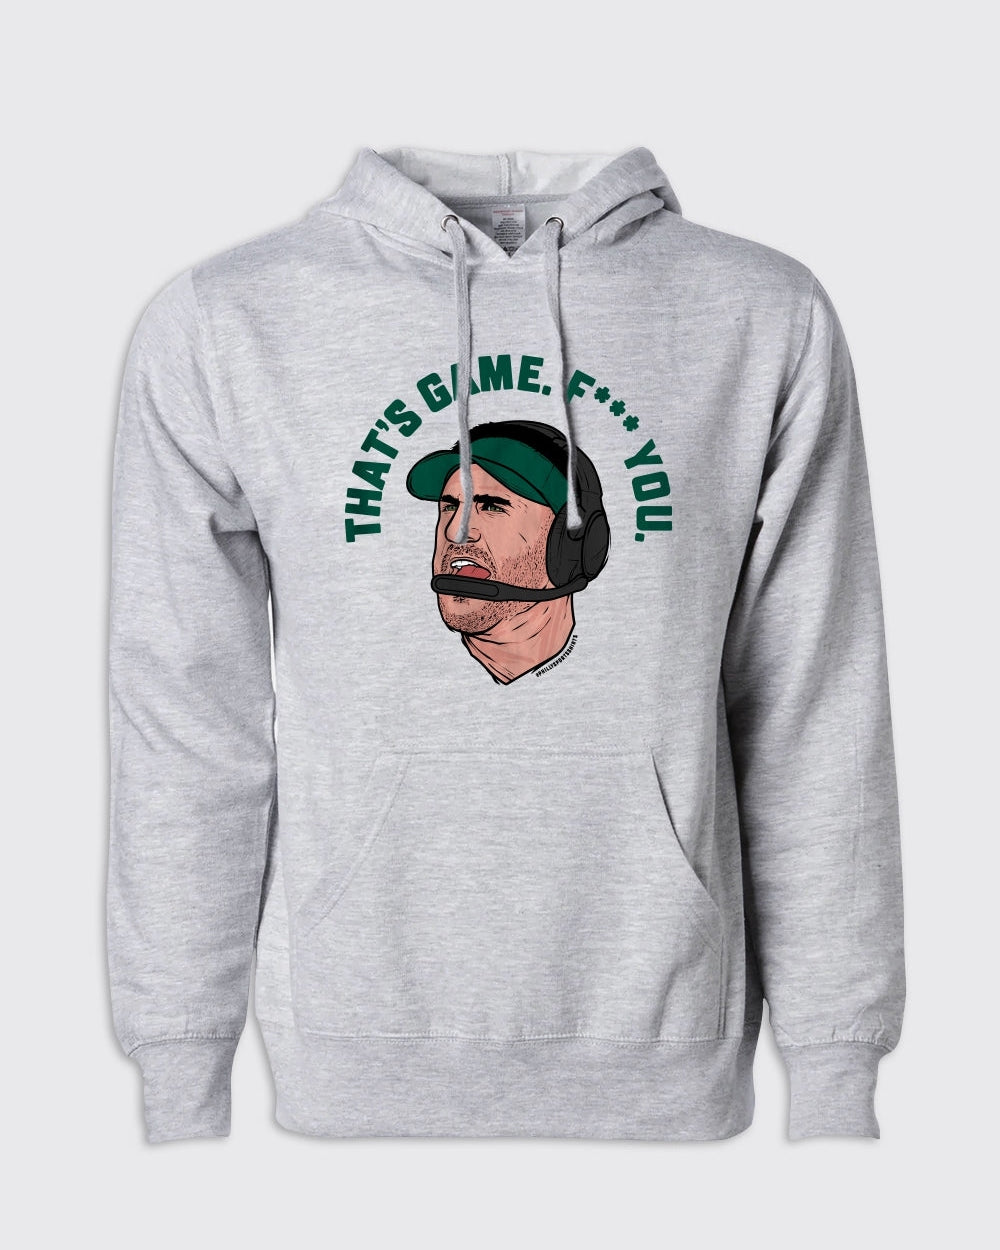 Philadelphia Eagles-That's Game Hoodie-Grey Heather-Philly Sports Shirts